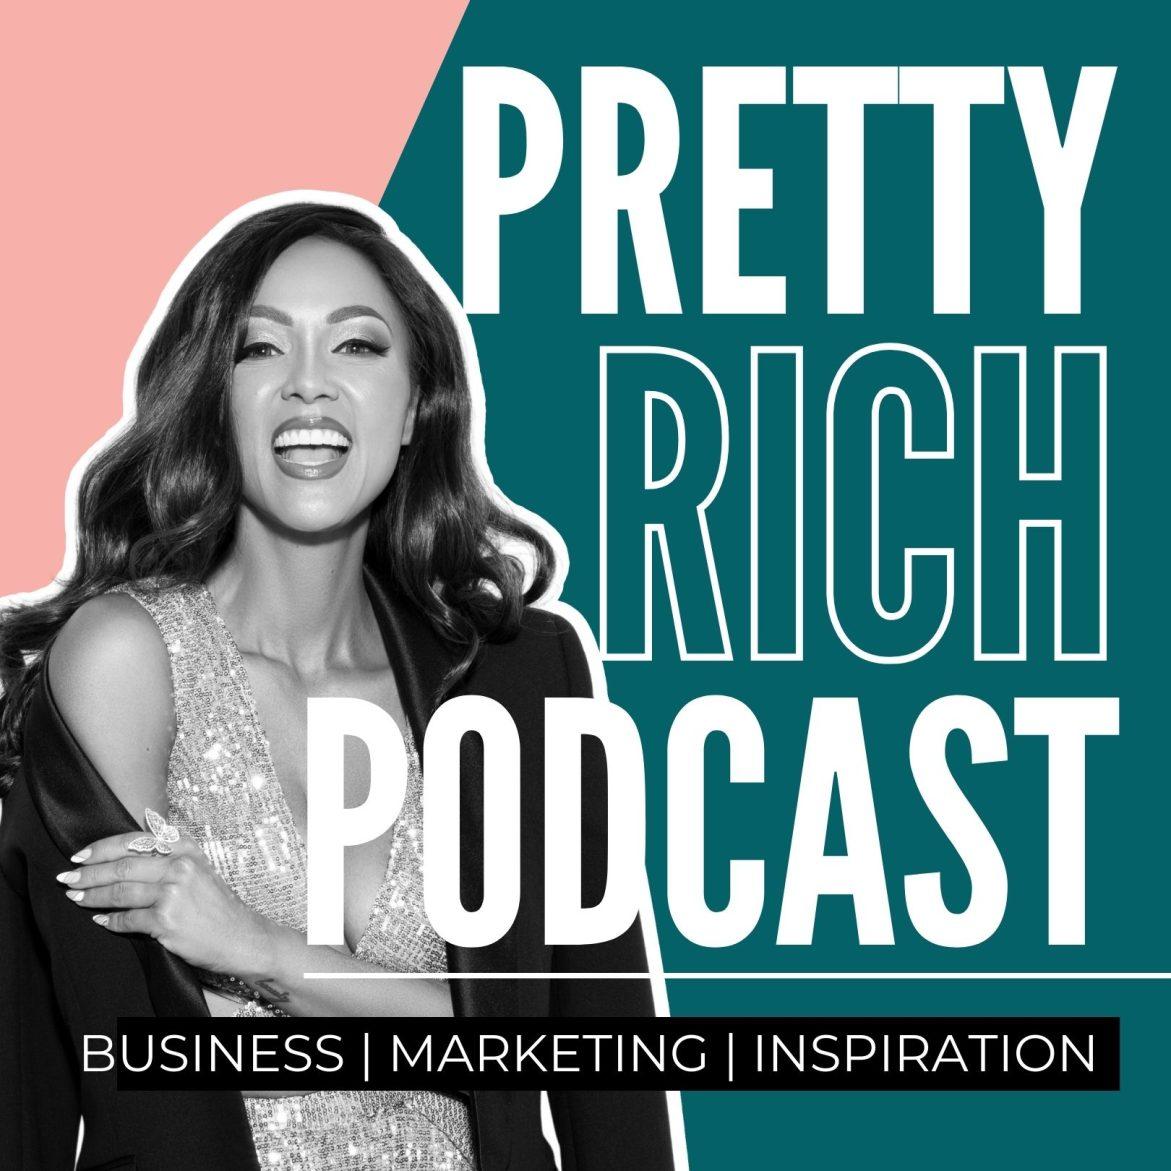 Black Podcasting - How I Built 2 Multimillion Dollar Businesses Without An MBA